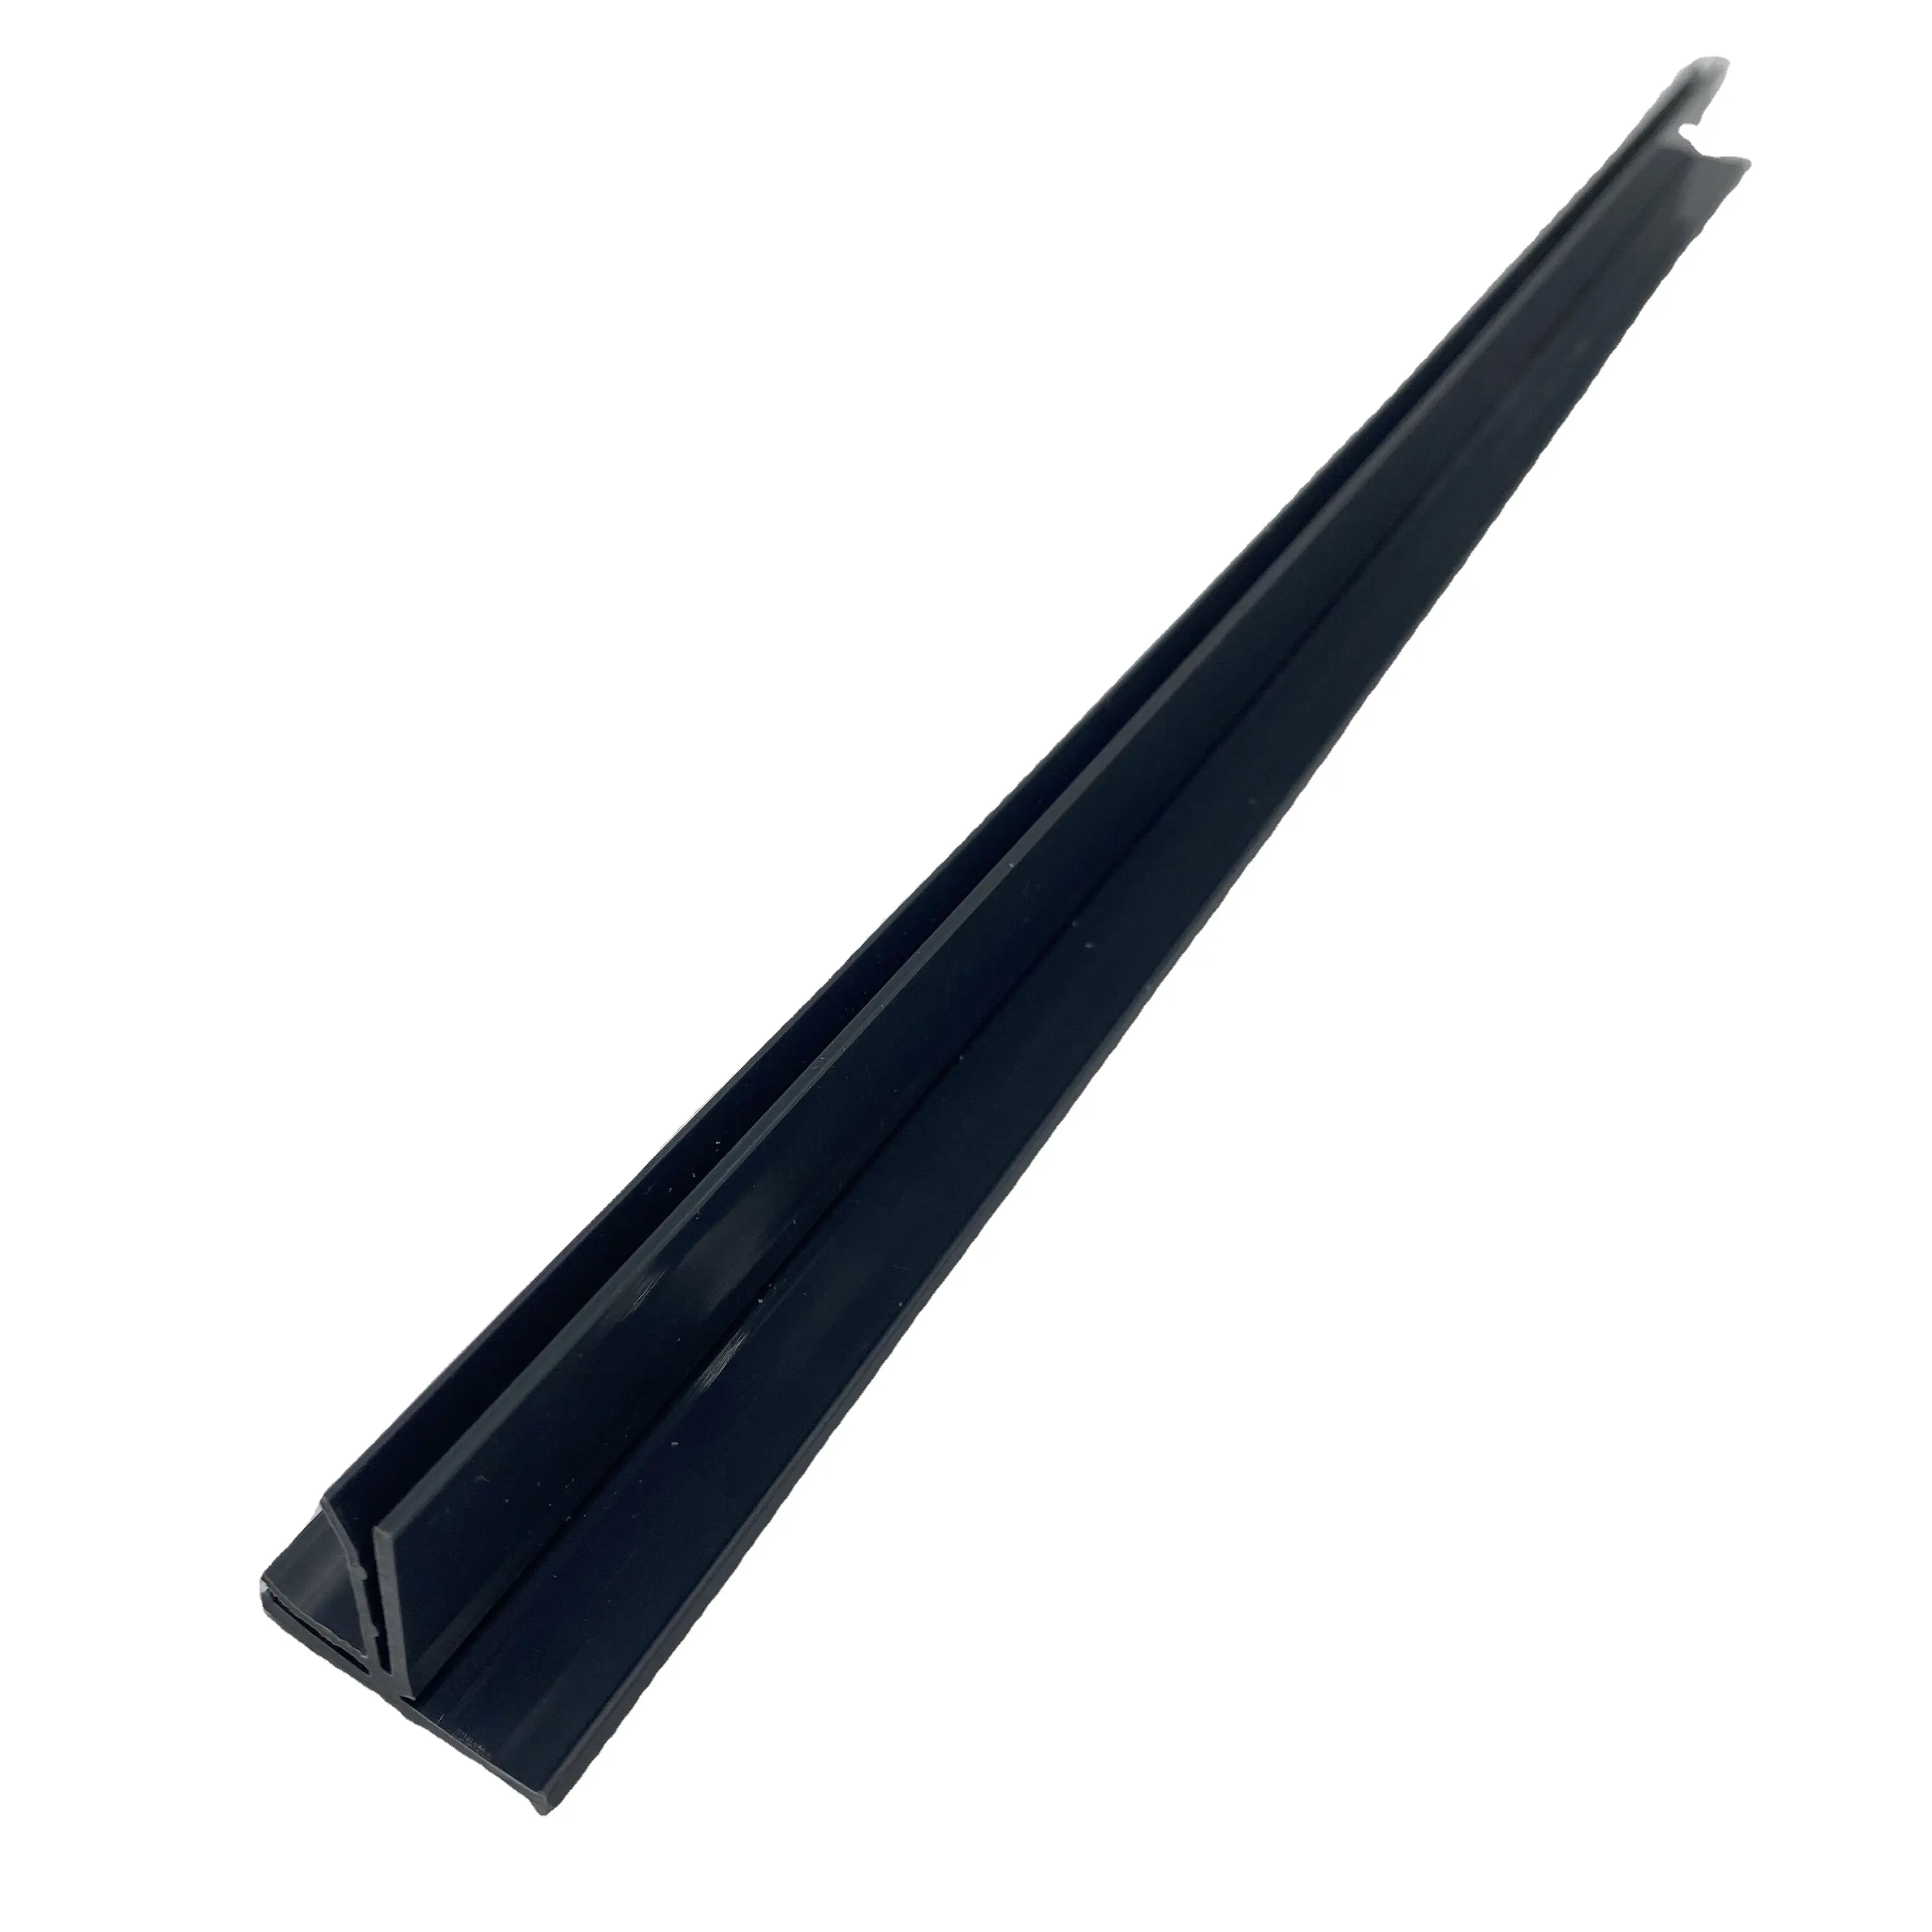 One stop customized Custom Plastic Extrusions Extruded Shapes Profiles rigid PVC Tubing